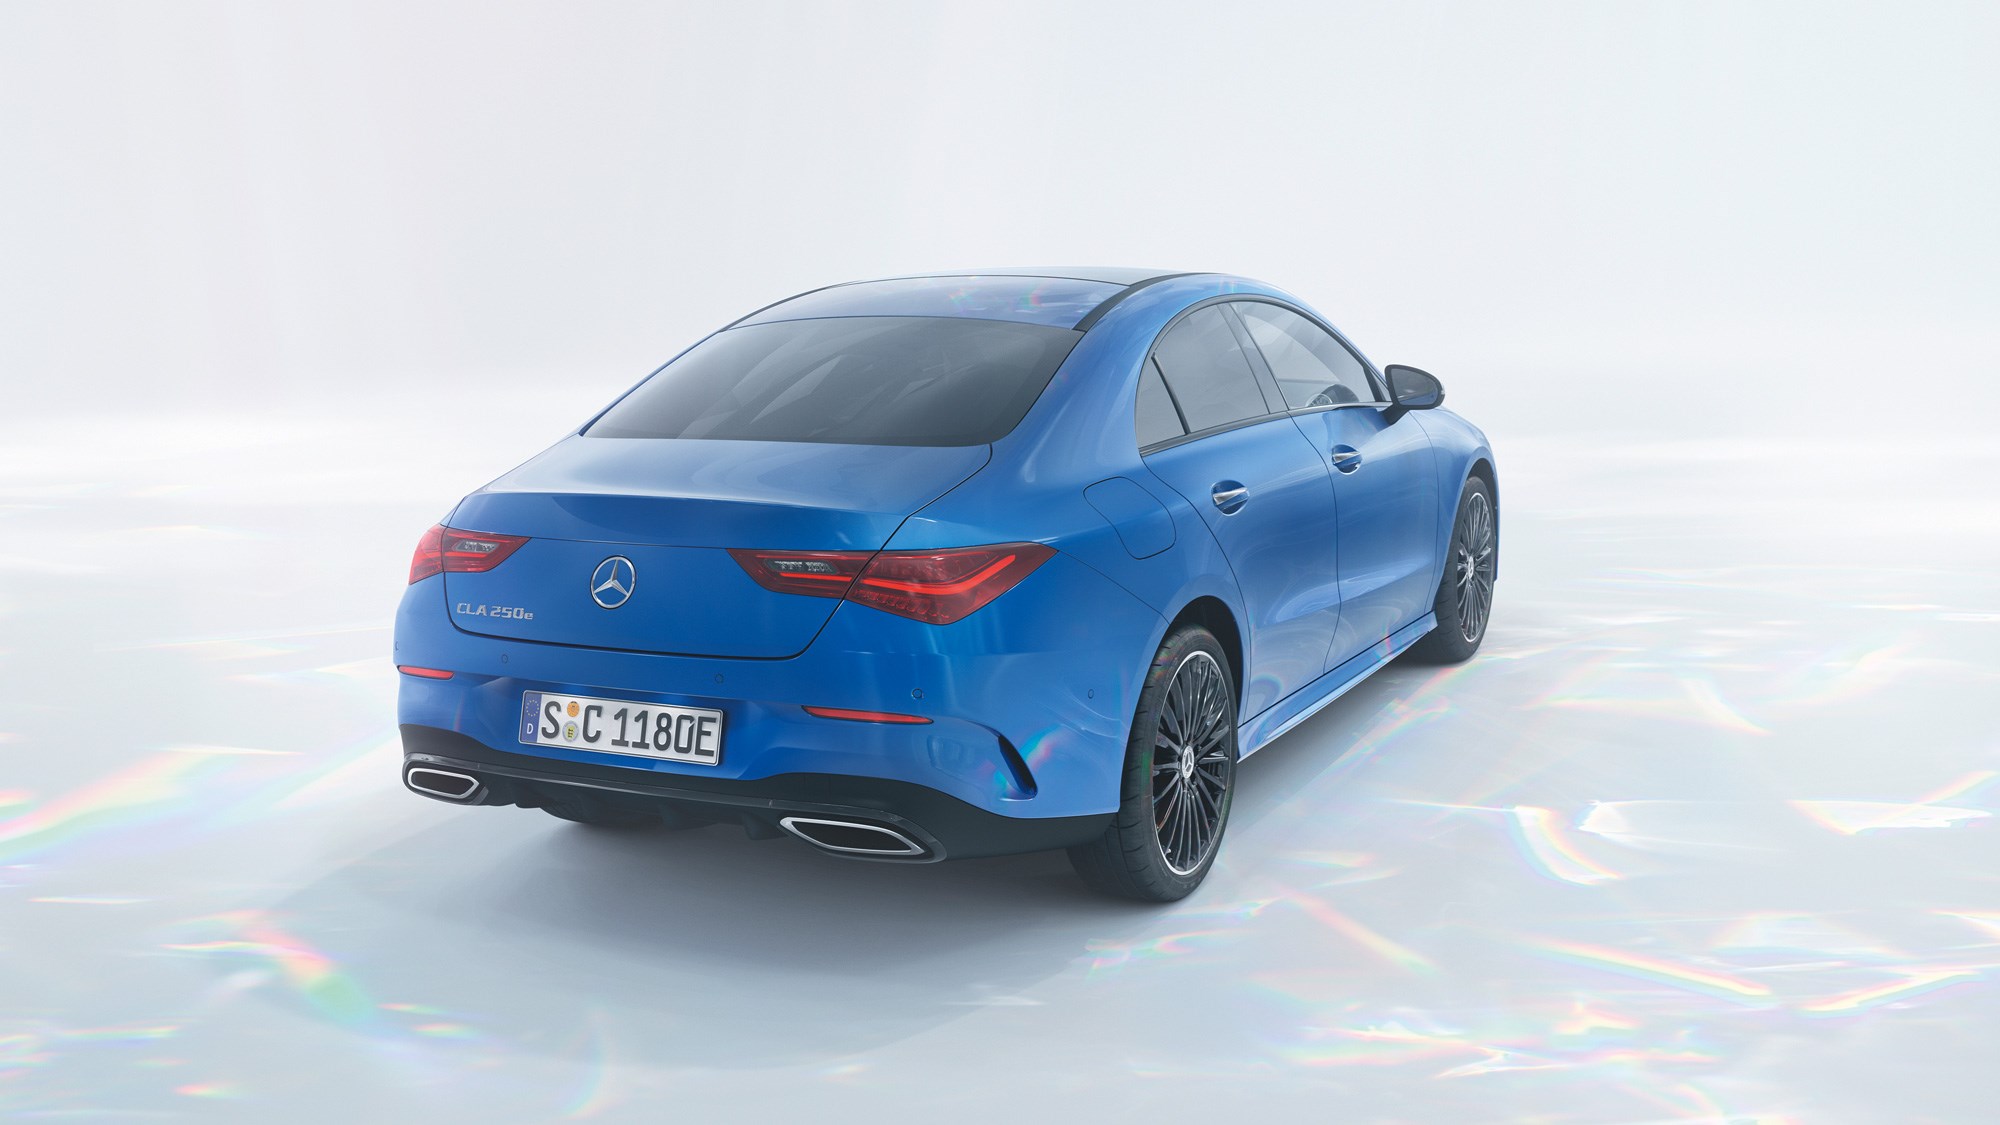 Mercedes-Benz CLA facelift tipped for 2023 reveal